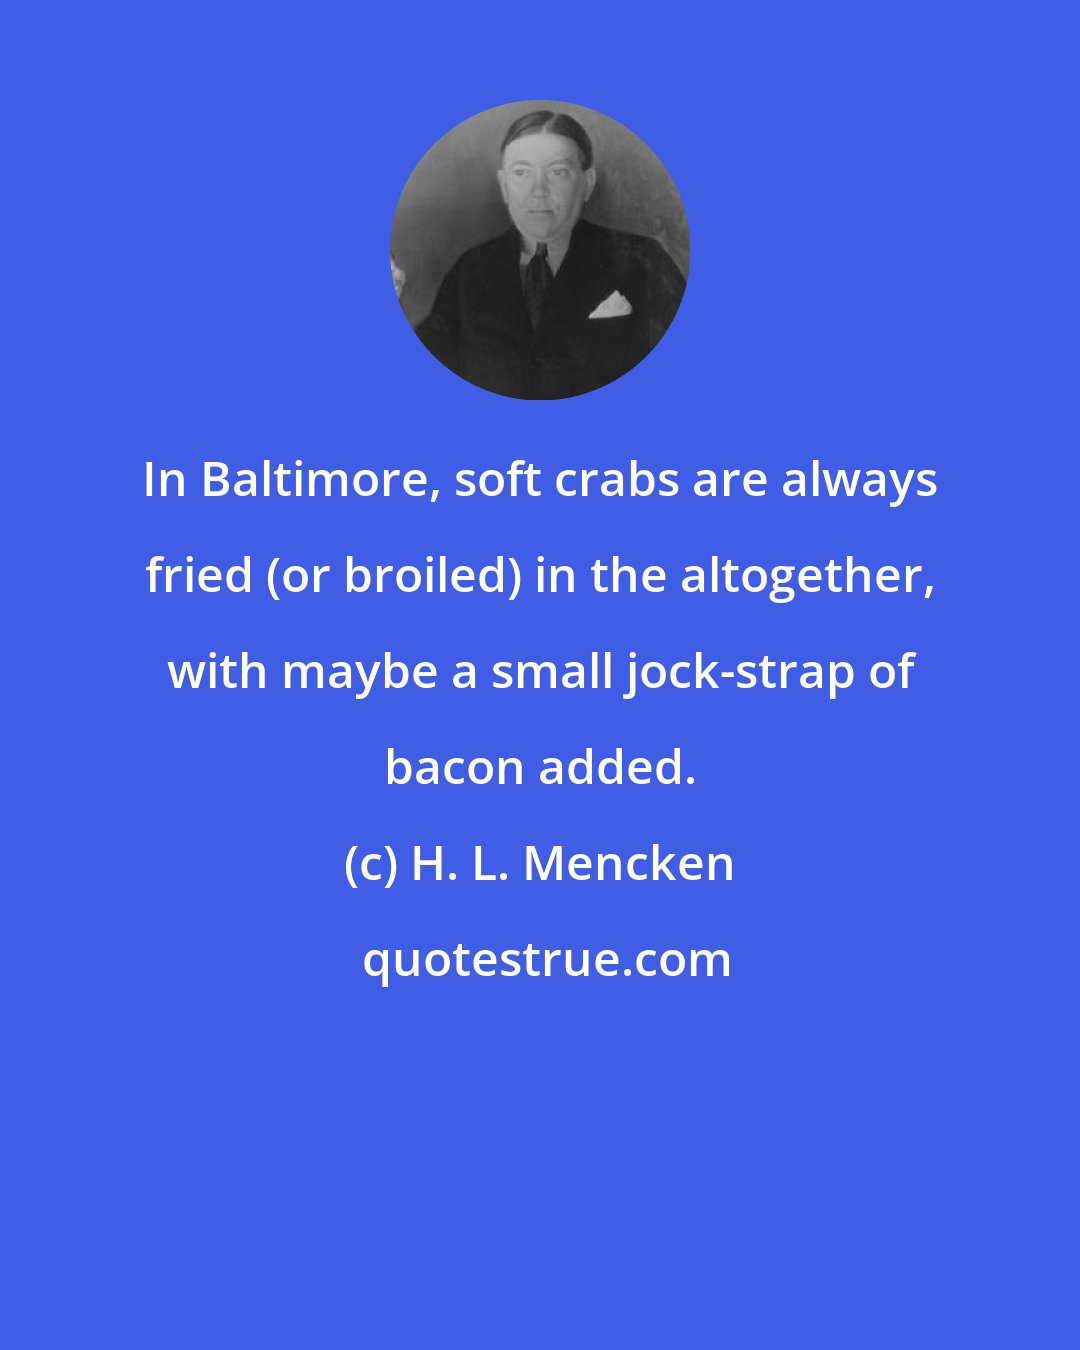 H. L. Mencken: In Baltimore, soft crabs are always fried (or broiled) in the altogether, with maybe a small jock-strap of bacon added.